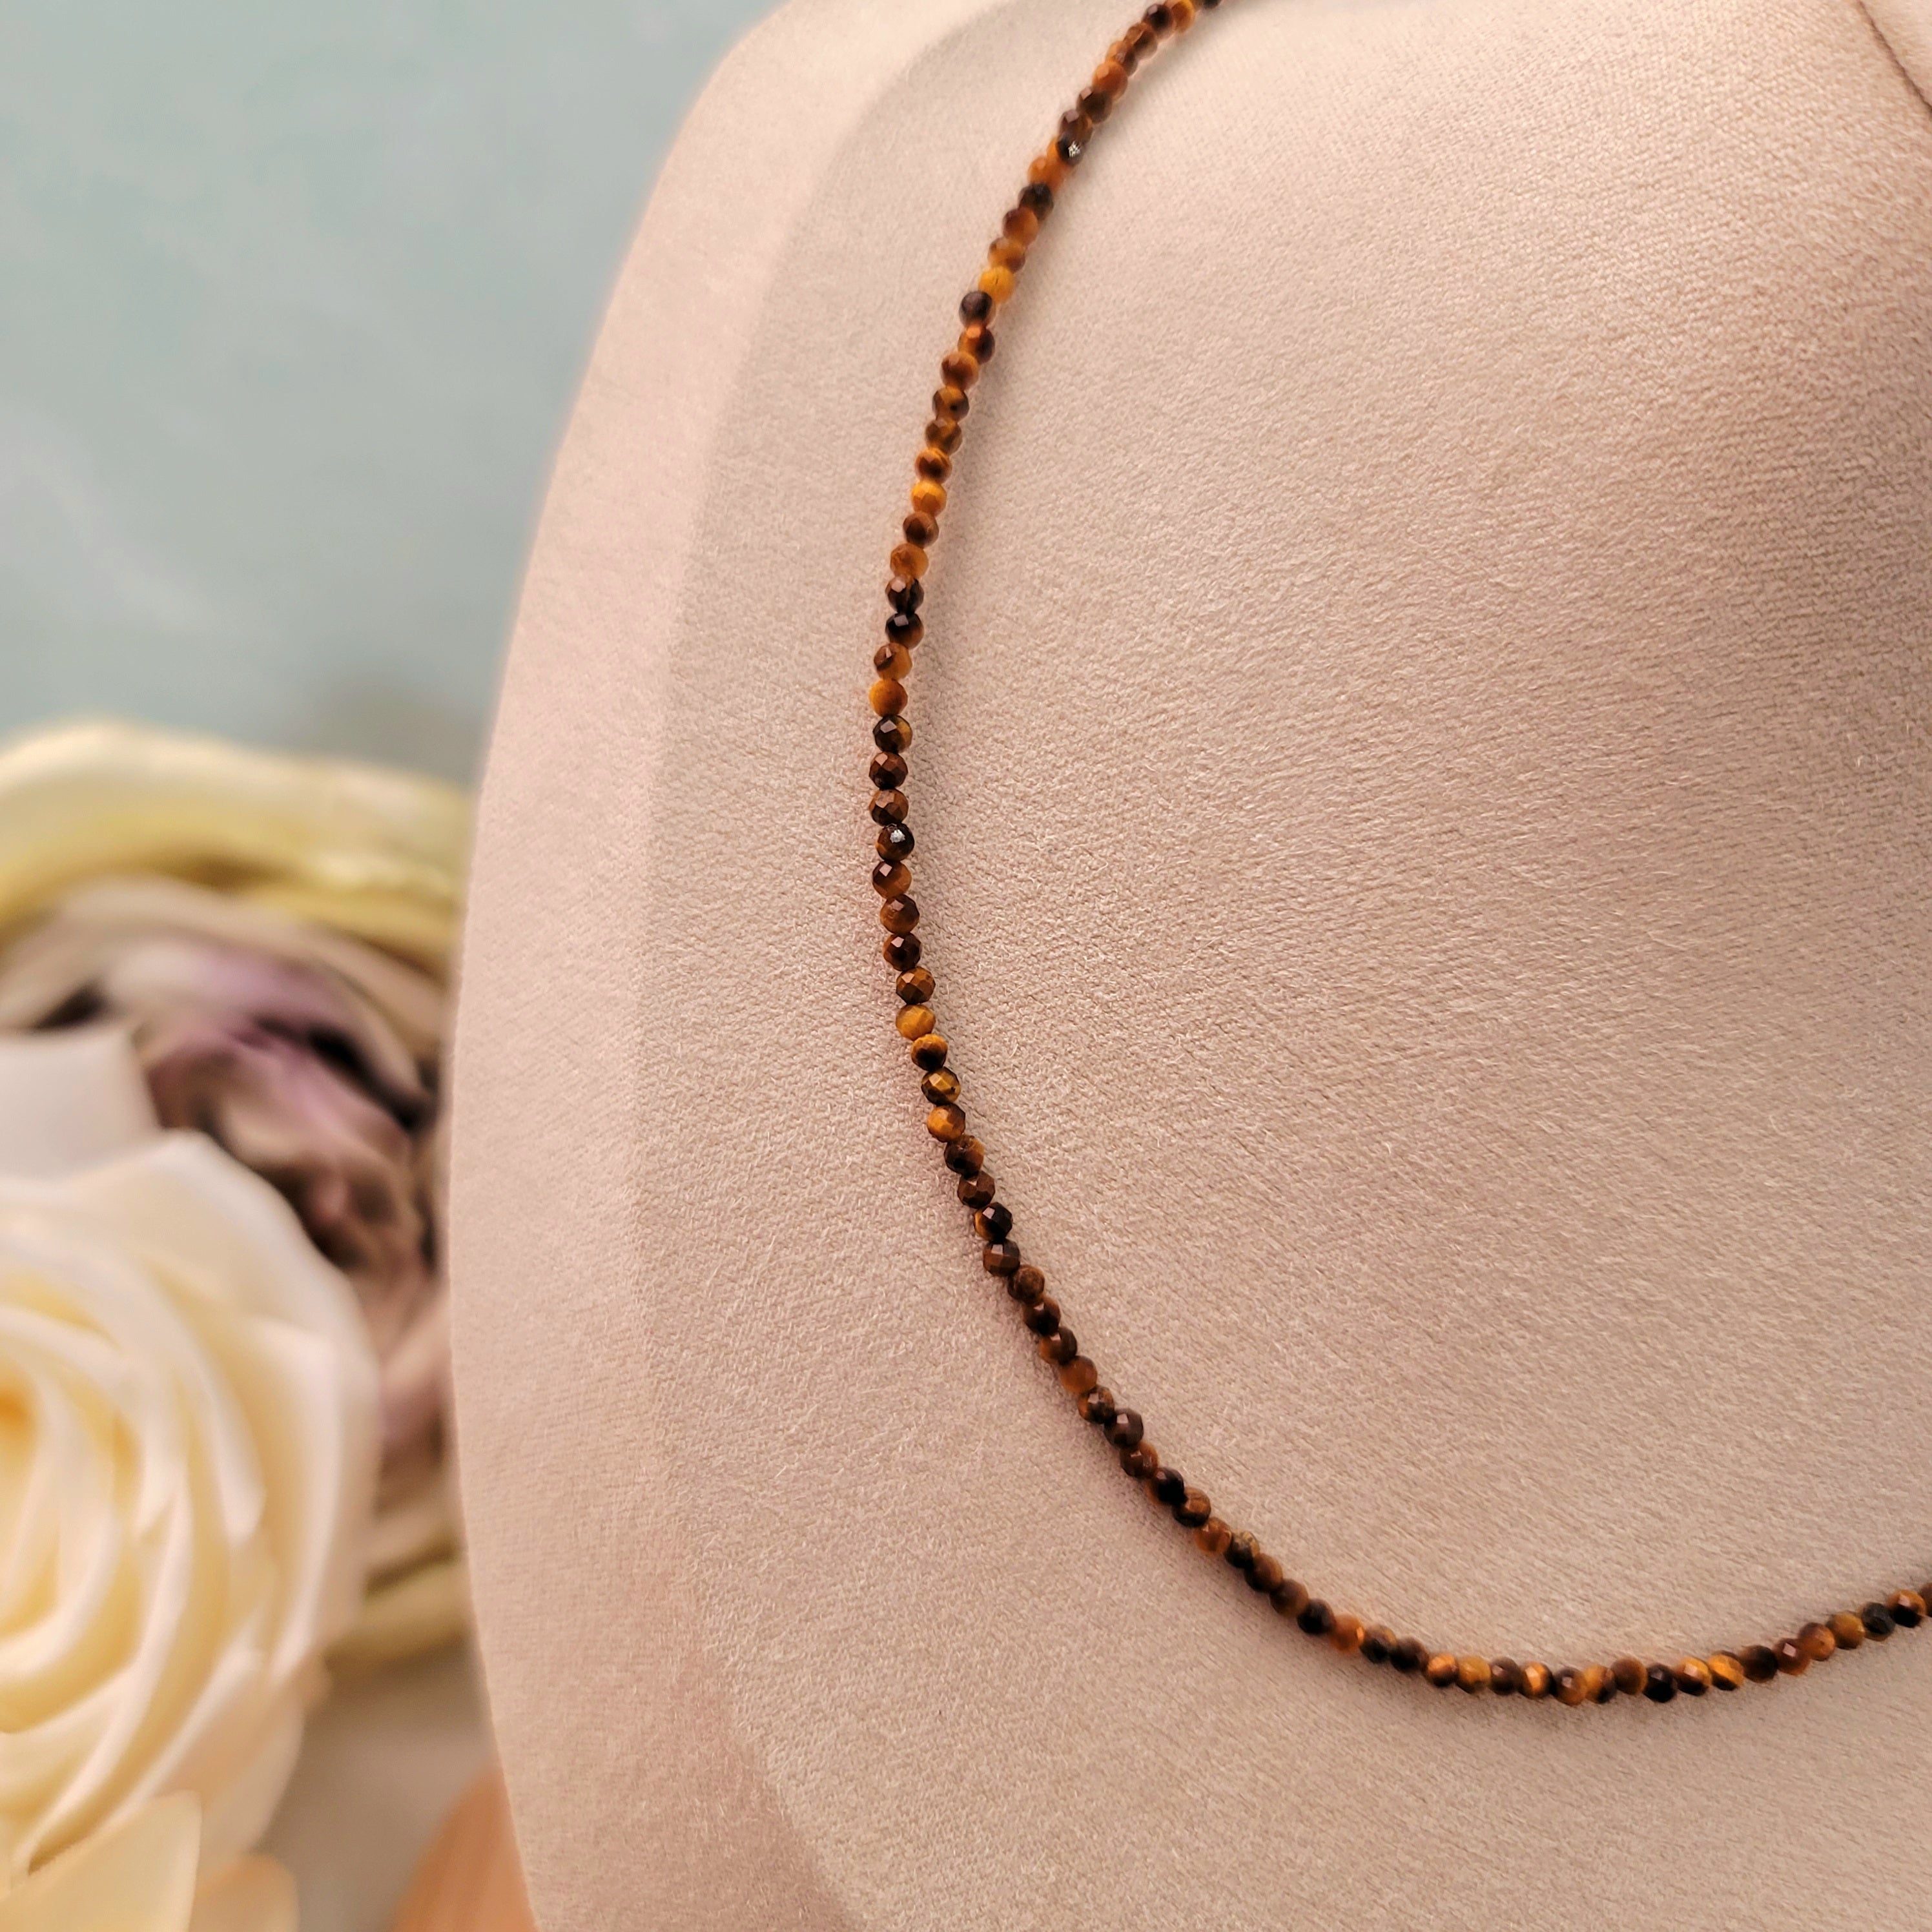 Tiger Eye Micro Faceted Choker/Layering Necklace for Grounding and Finding your Center